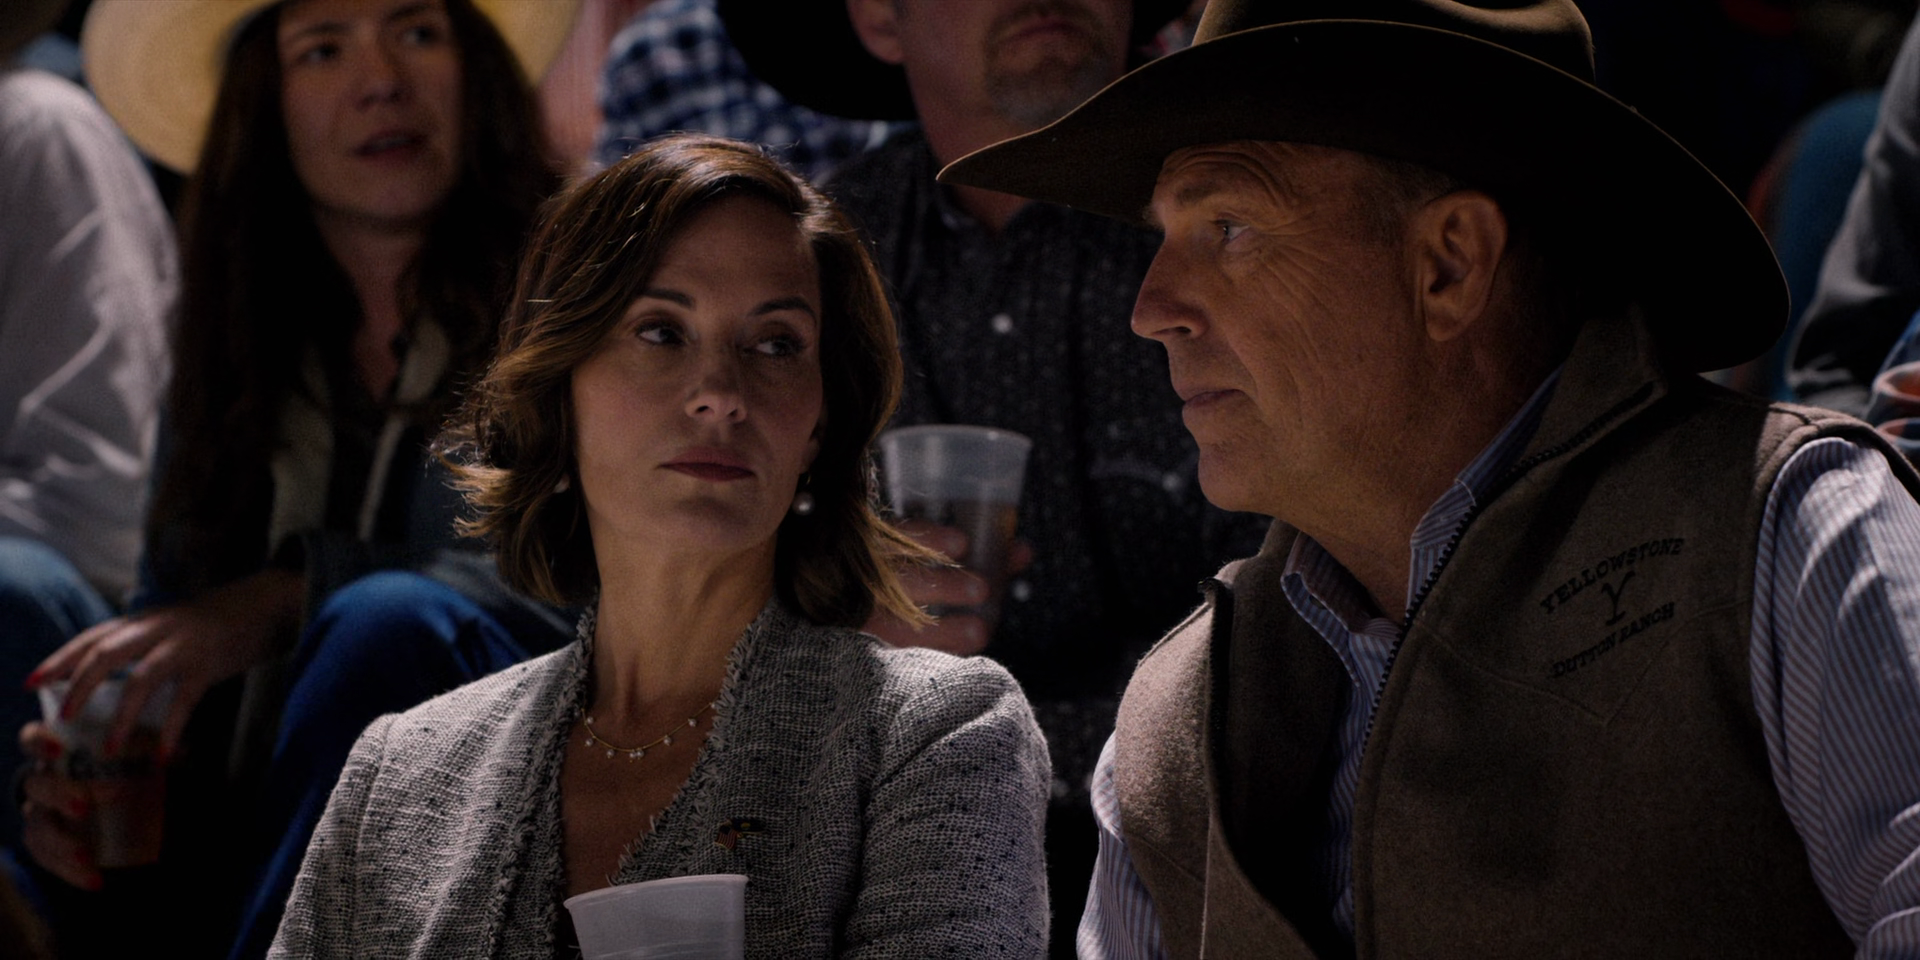 Beth Dutton (Kelly Reilly) talks with her husband John (Kevin Costner) during the local rodeo via Yellowstone Season 3 Episode 3 "An Acceptable Surrender" (2020), Paramount